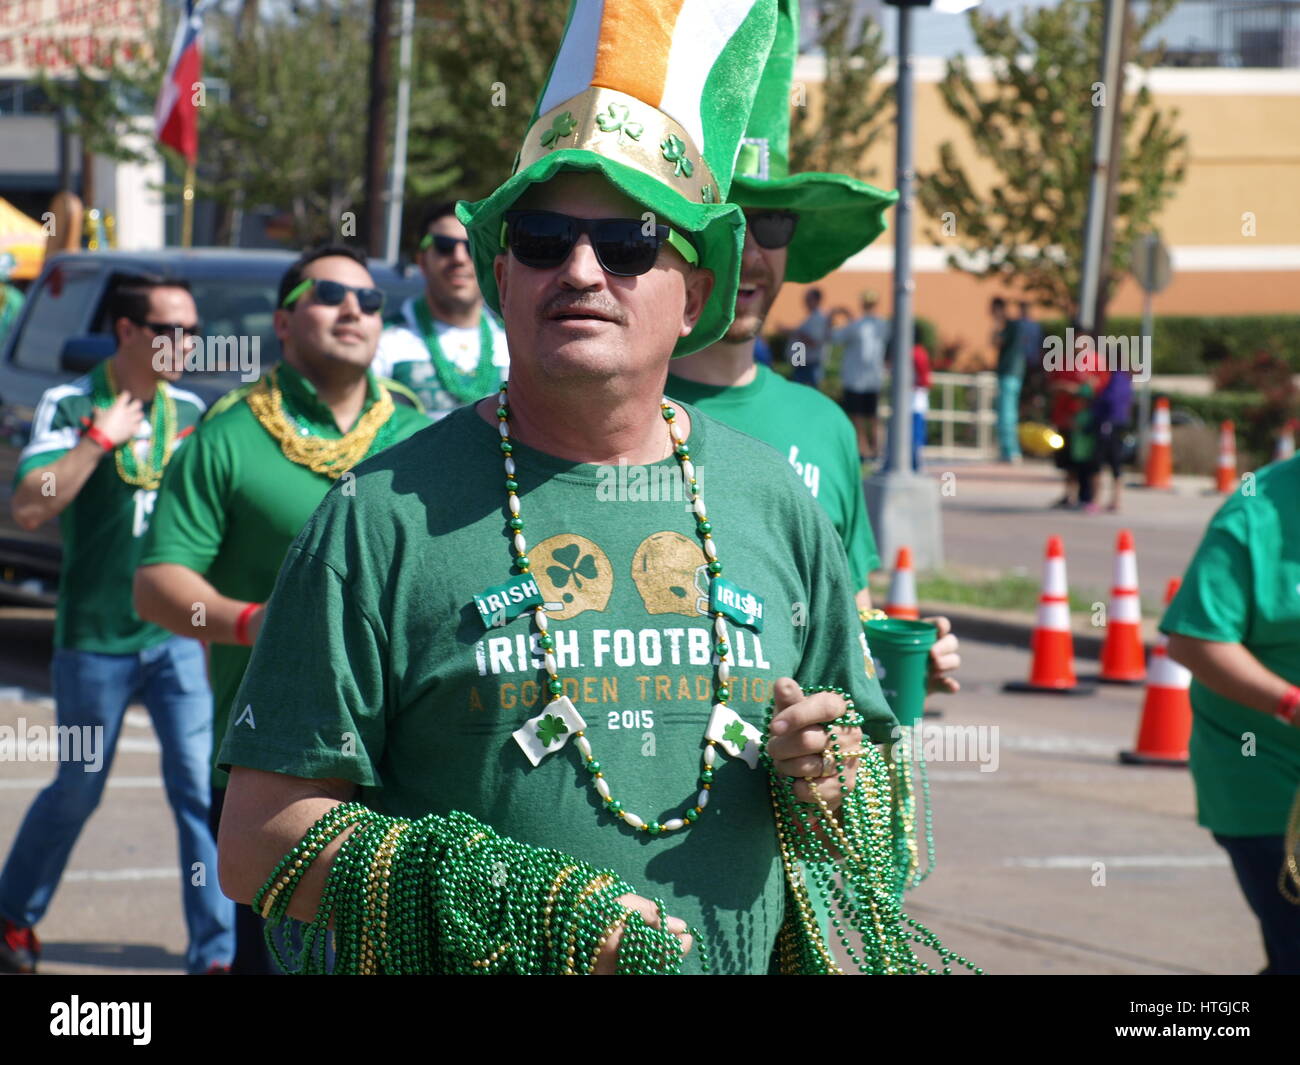 Dallas, US 11th March 2017. The annual Dallas St. Patrick's Parade stepped off today with former Dallas police chief, David Brown as Grand Marshal.  Credit: dallaspaparazzo/Alamy Live News Stock Photo